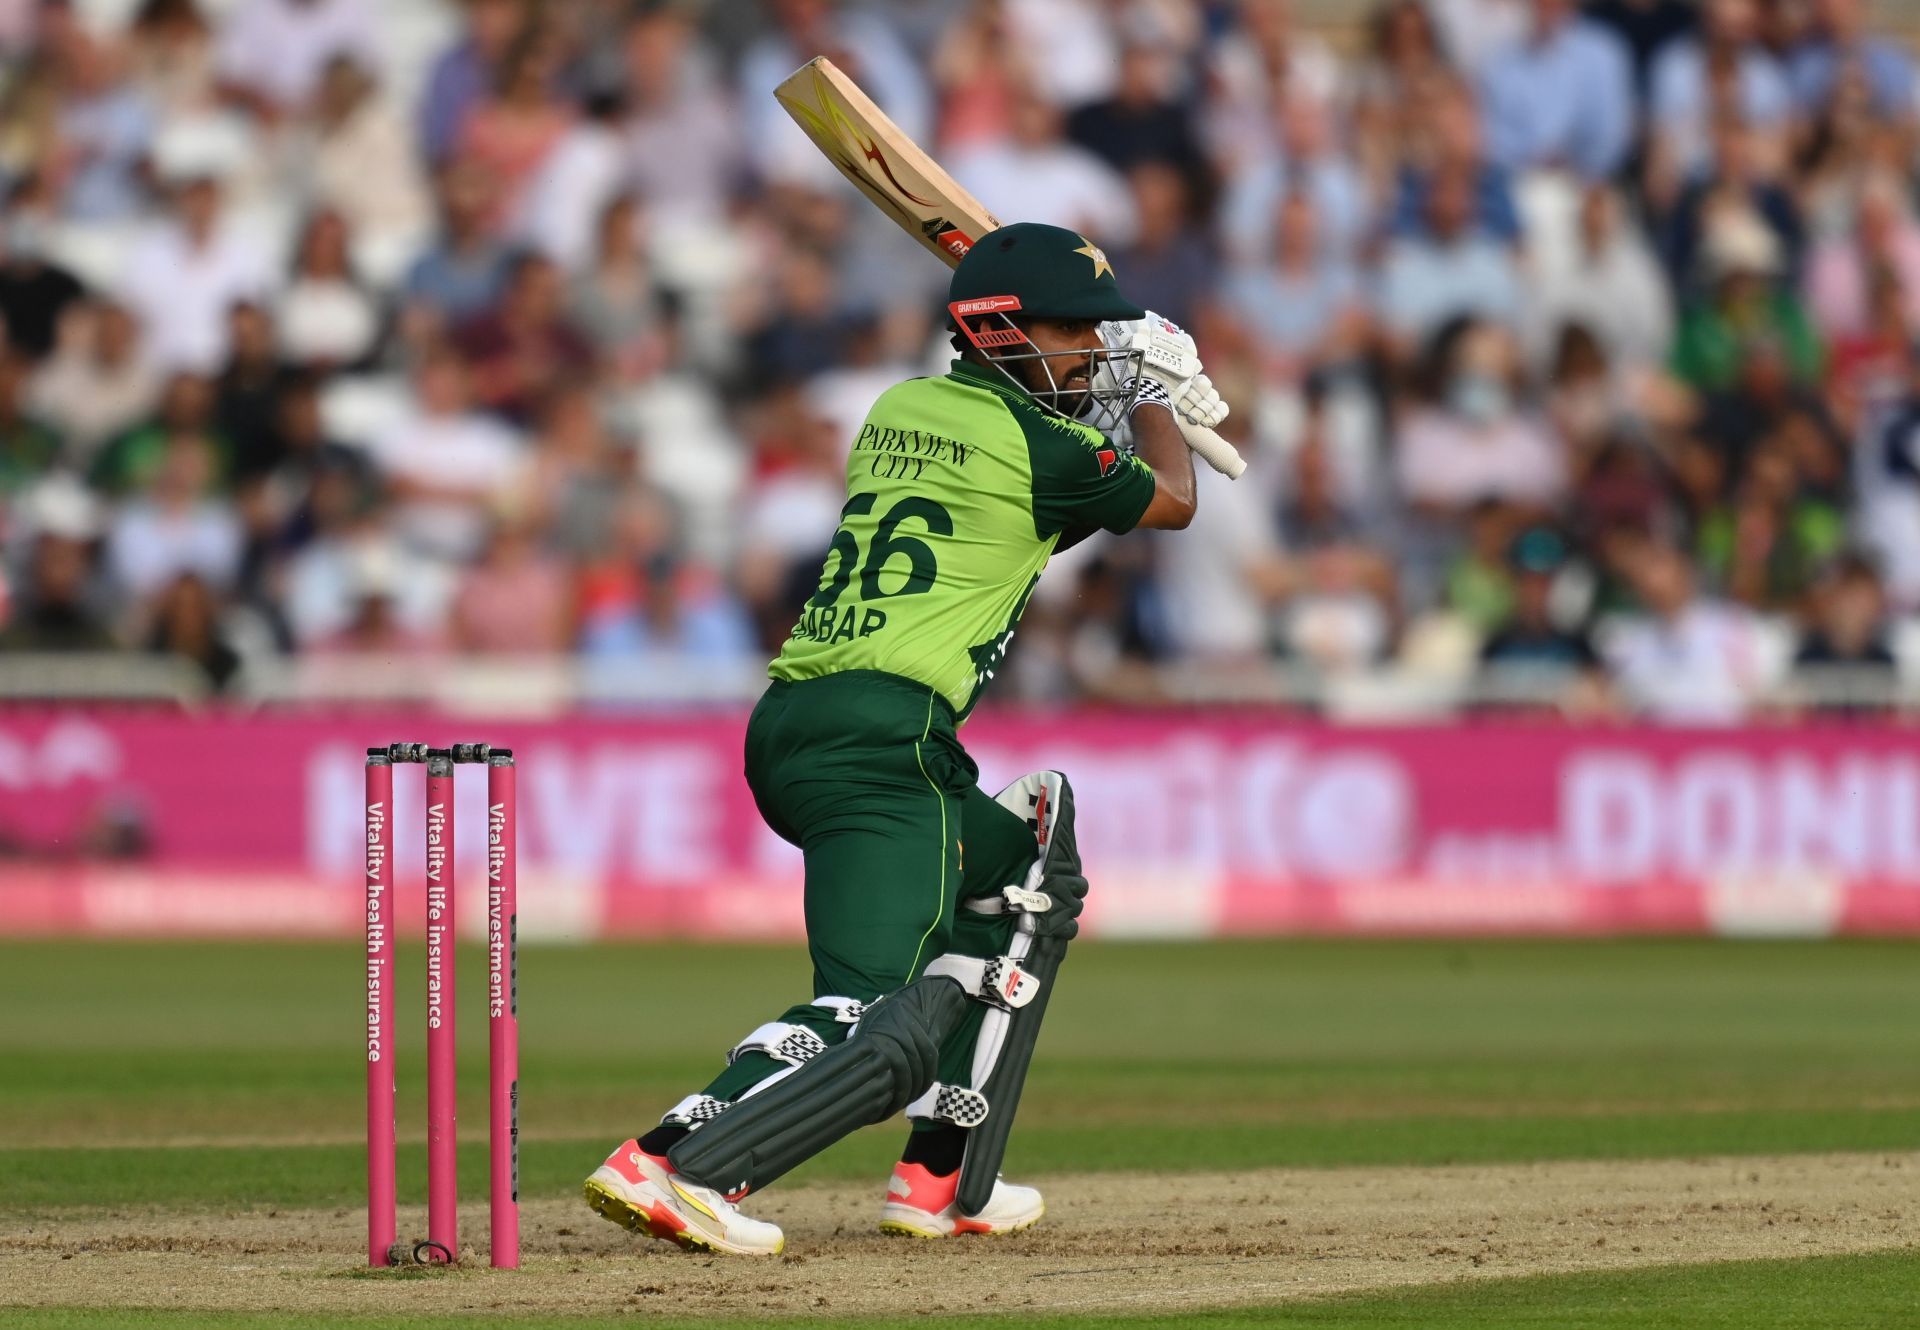 Babar Azam is the most accomplished batter in the Pakistan lineup